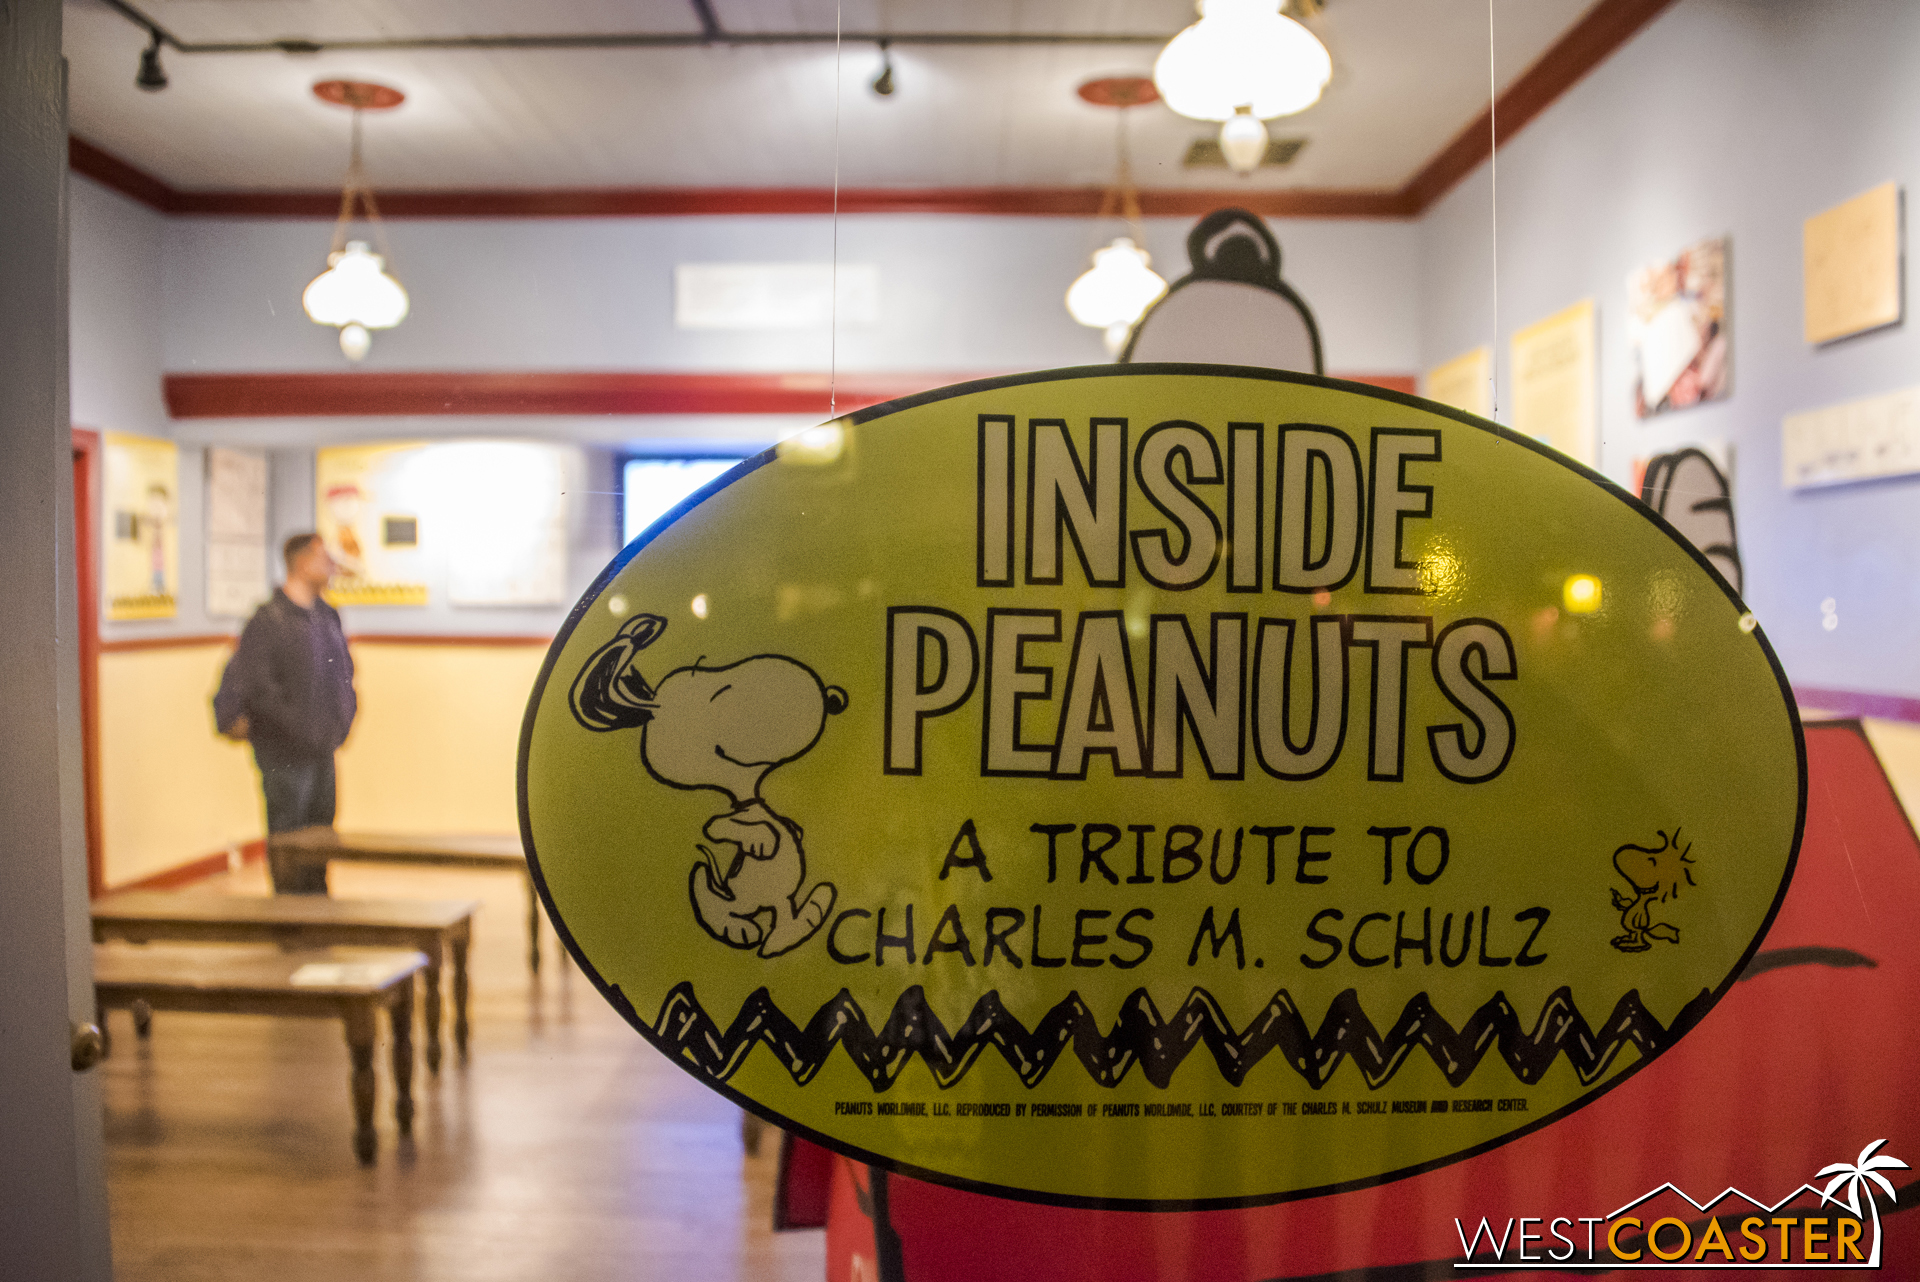  This building has taken on many features over the past few years, and right now, it's got an exhibit dedicated to Peanuts and Charles M. Schulz. 